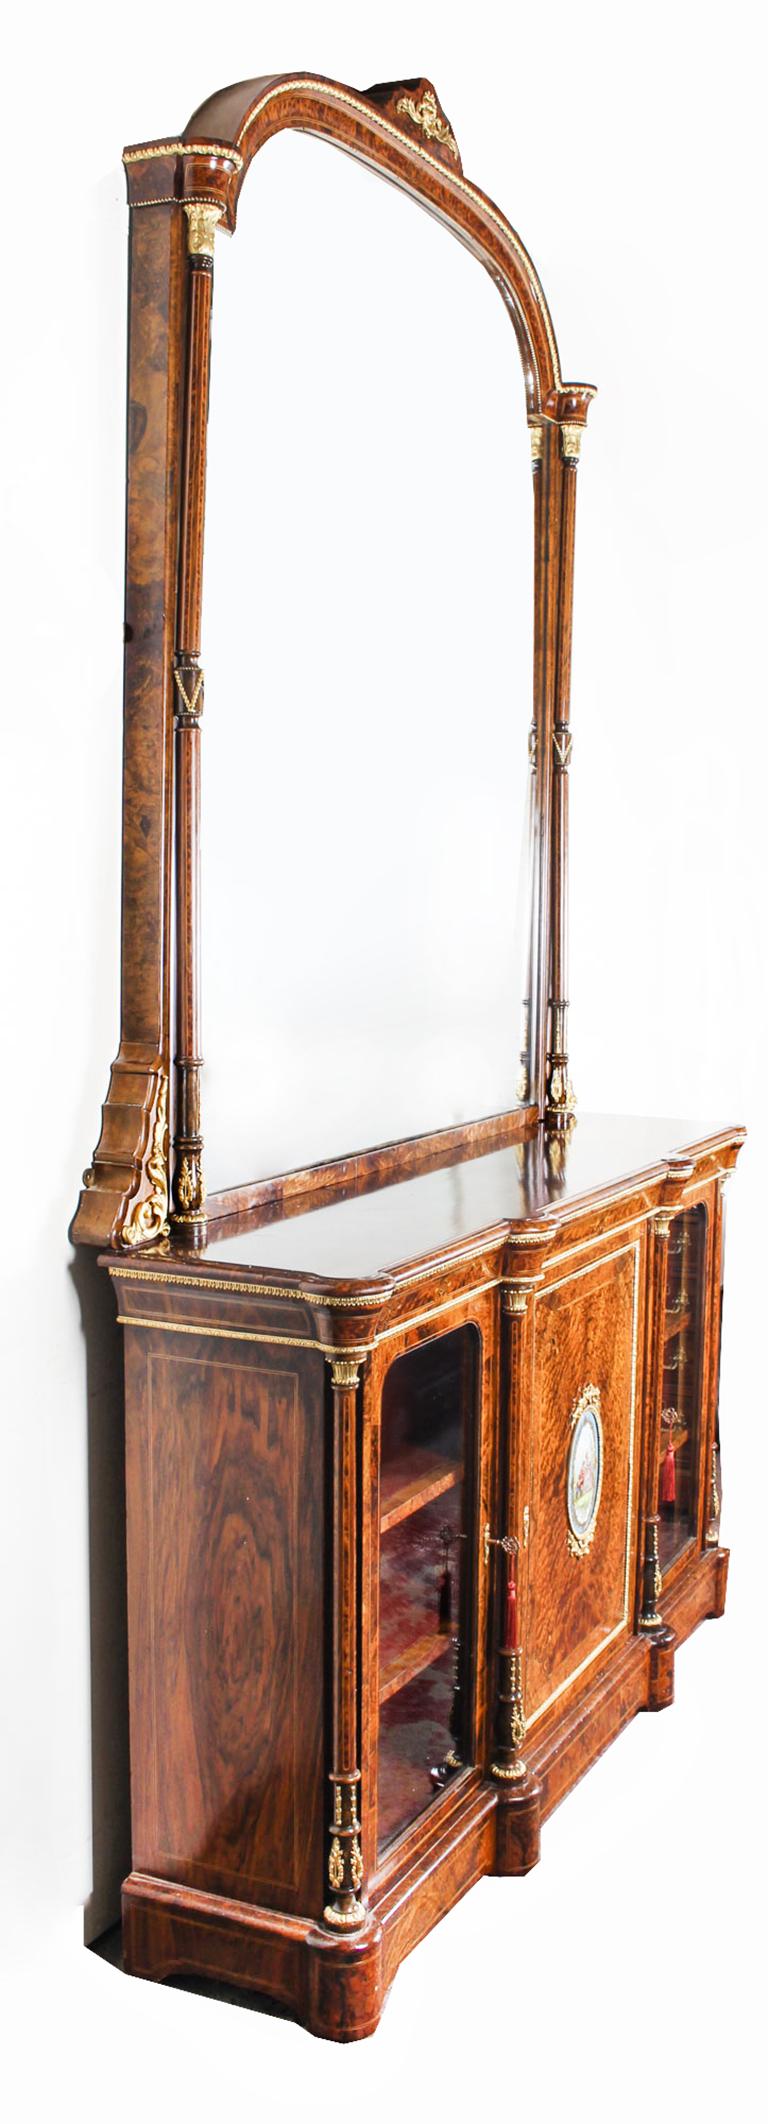 This is a monumental fine and rare antique Victorian burr walnut and amboyna, Sevres porcelain and ormolu-mounted breakfront mirror backed credenza, circa 1860 in date.
 
The well figured burr walnut top with perfectly matched veneers above a